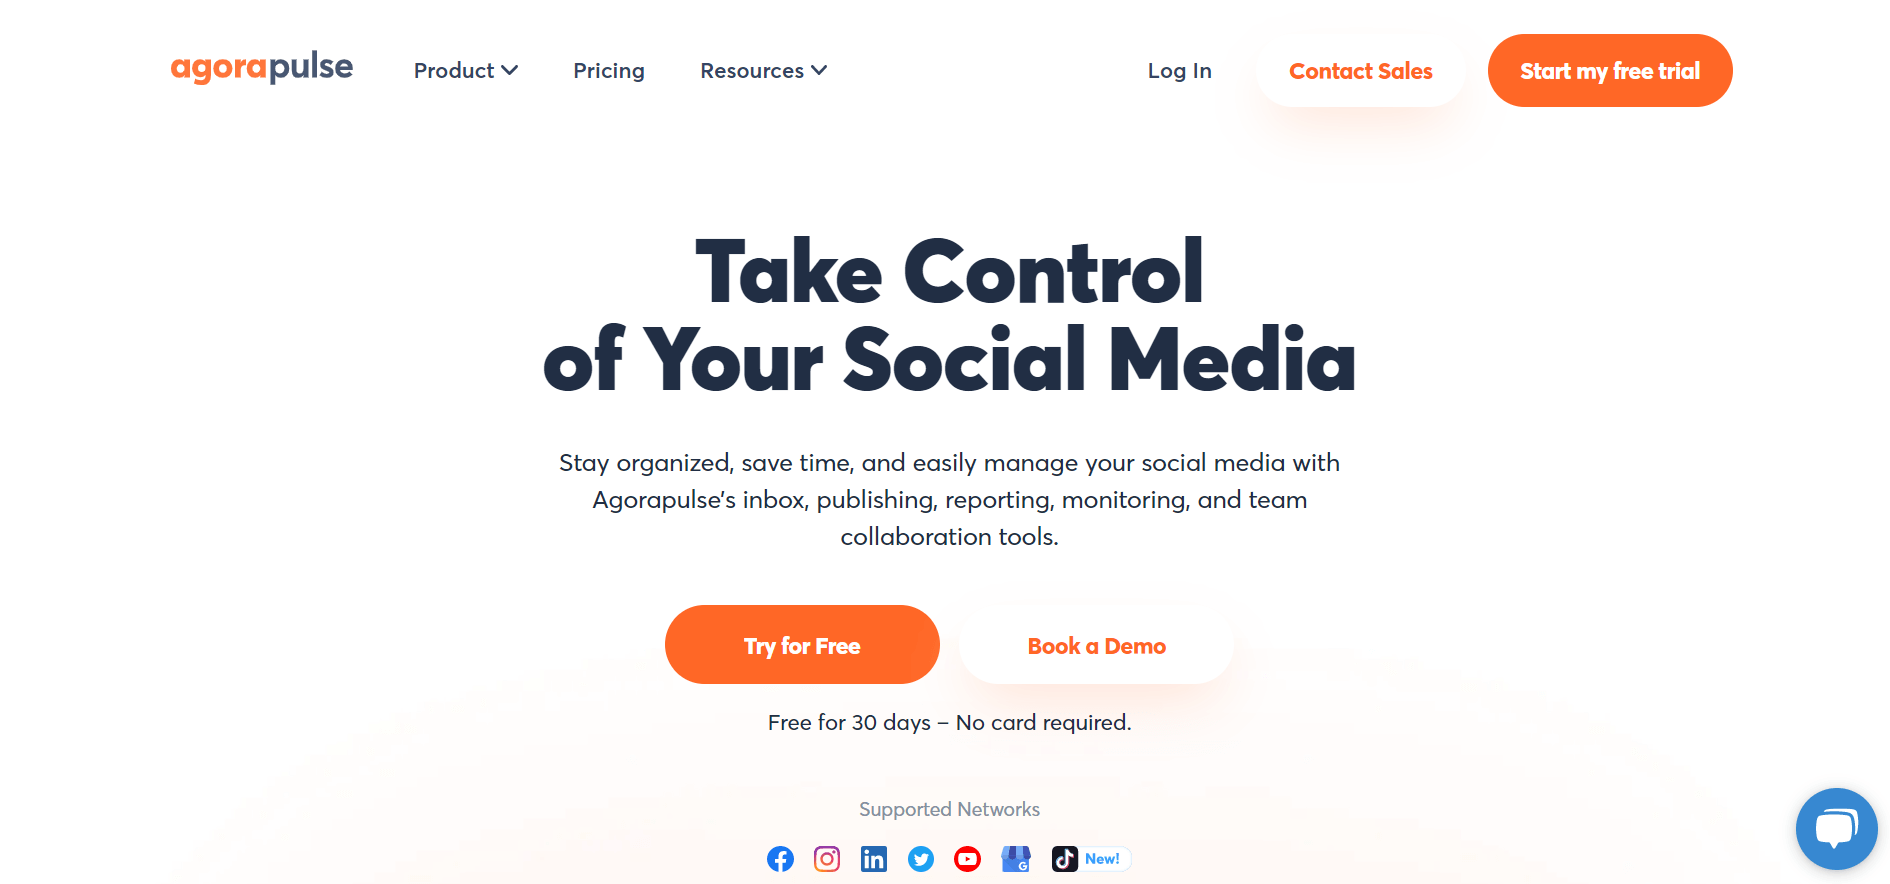 agorapulse home page with take control of your social media headline